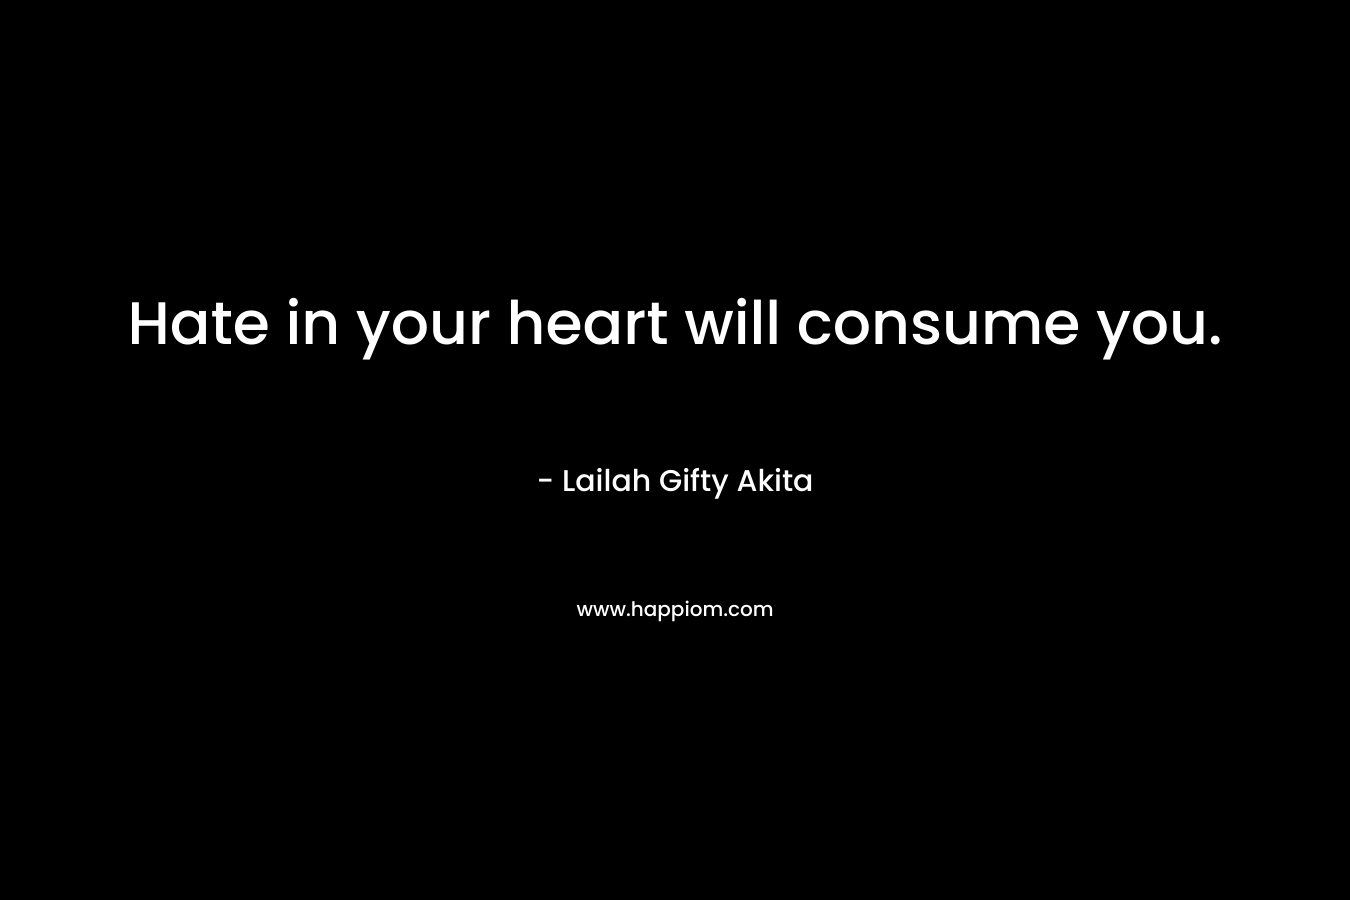 Hate in your heart will consume you. – Lailah Gifty Akita